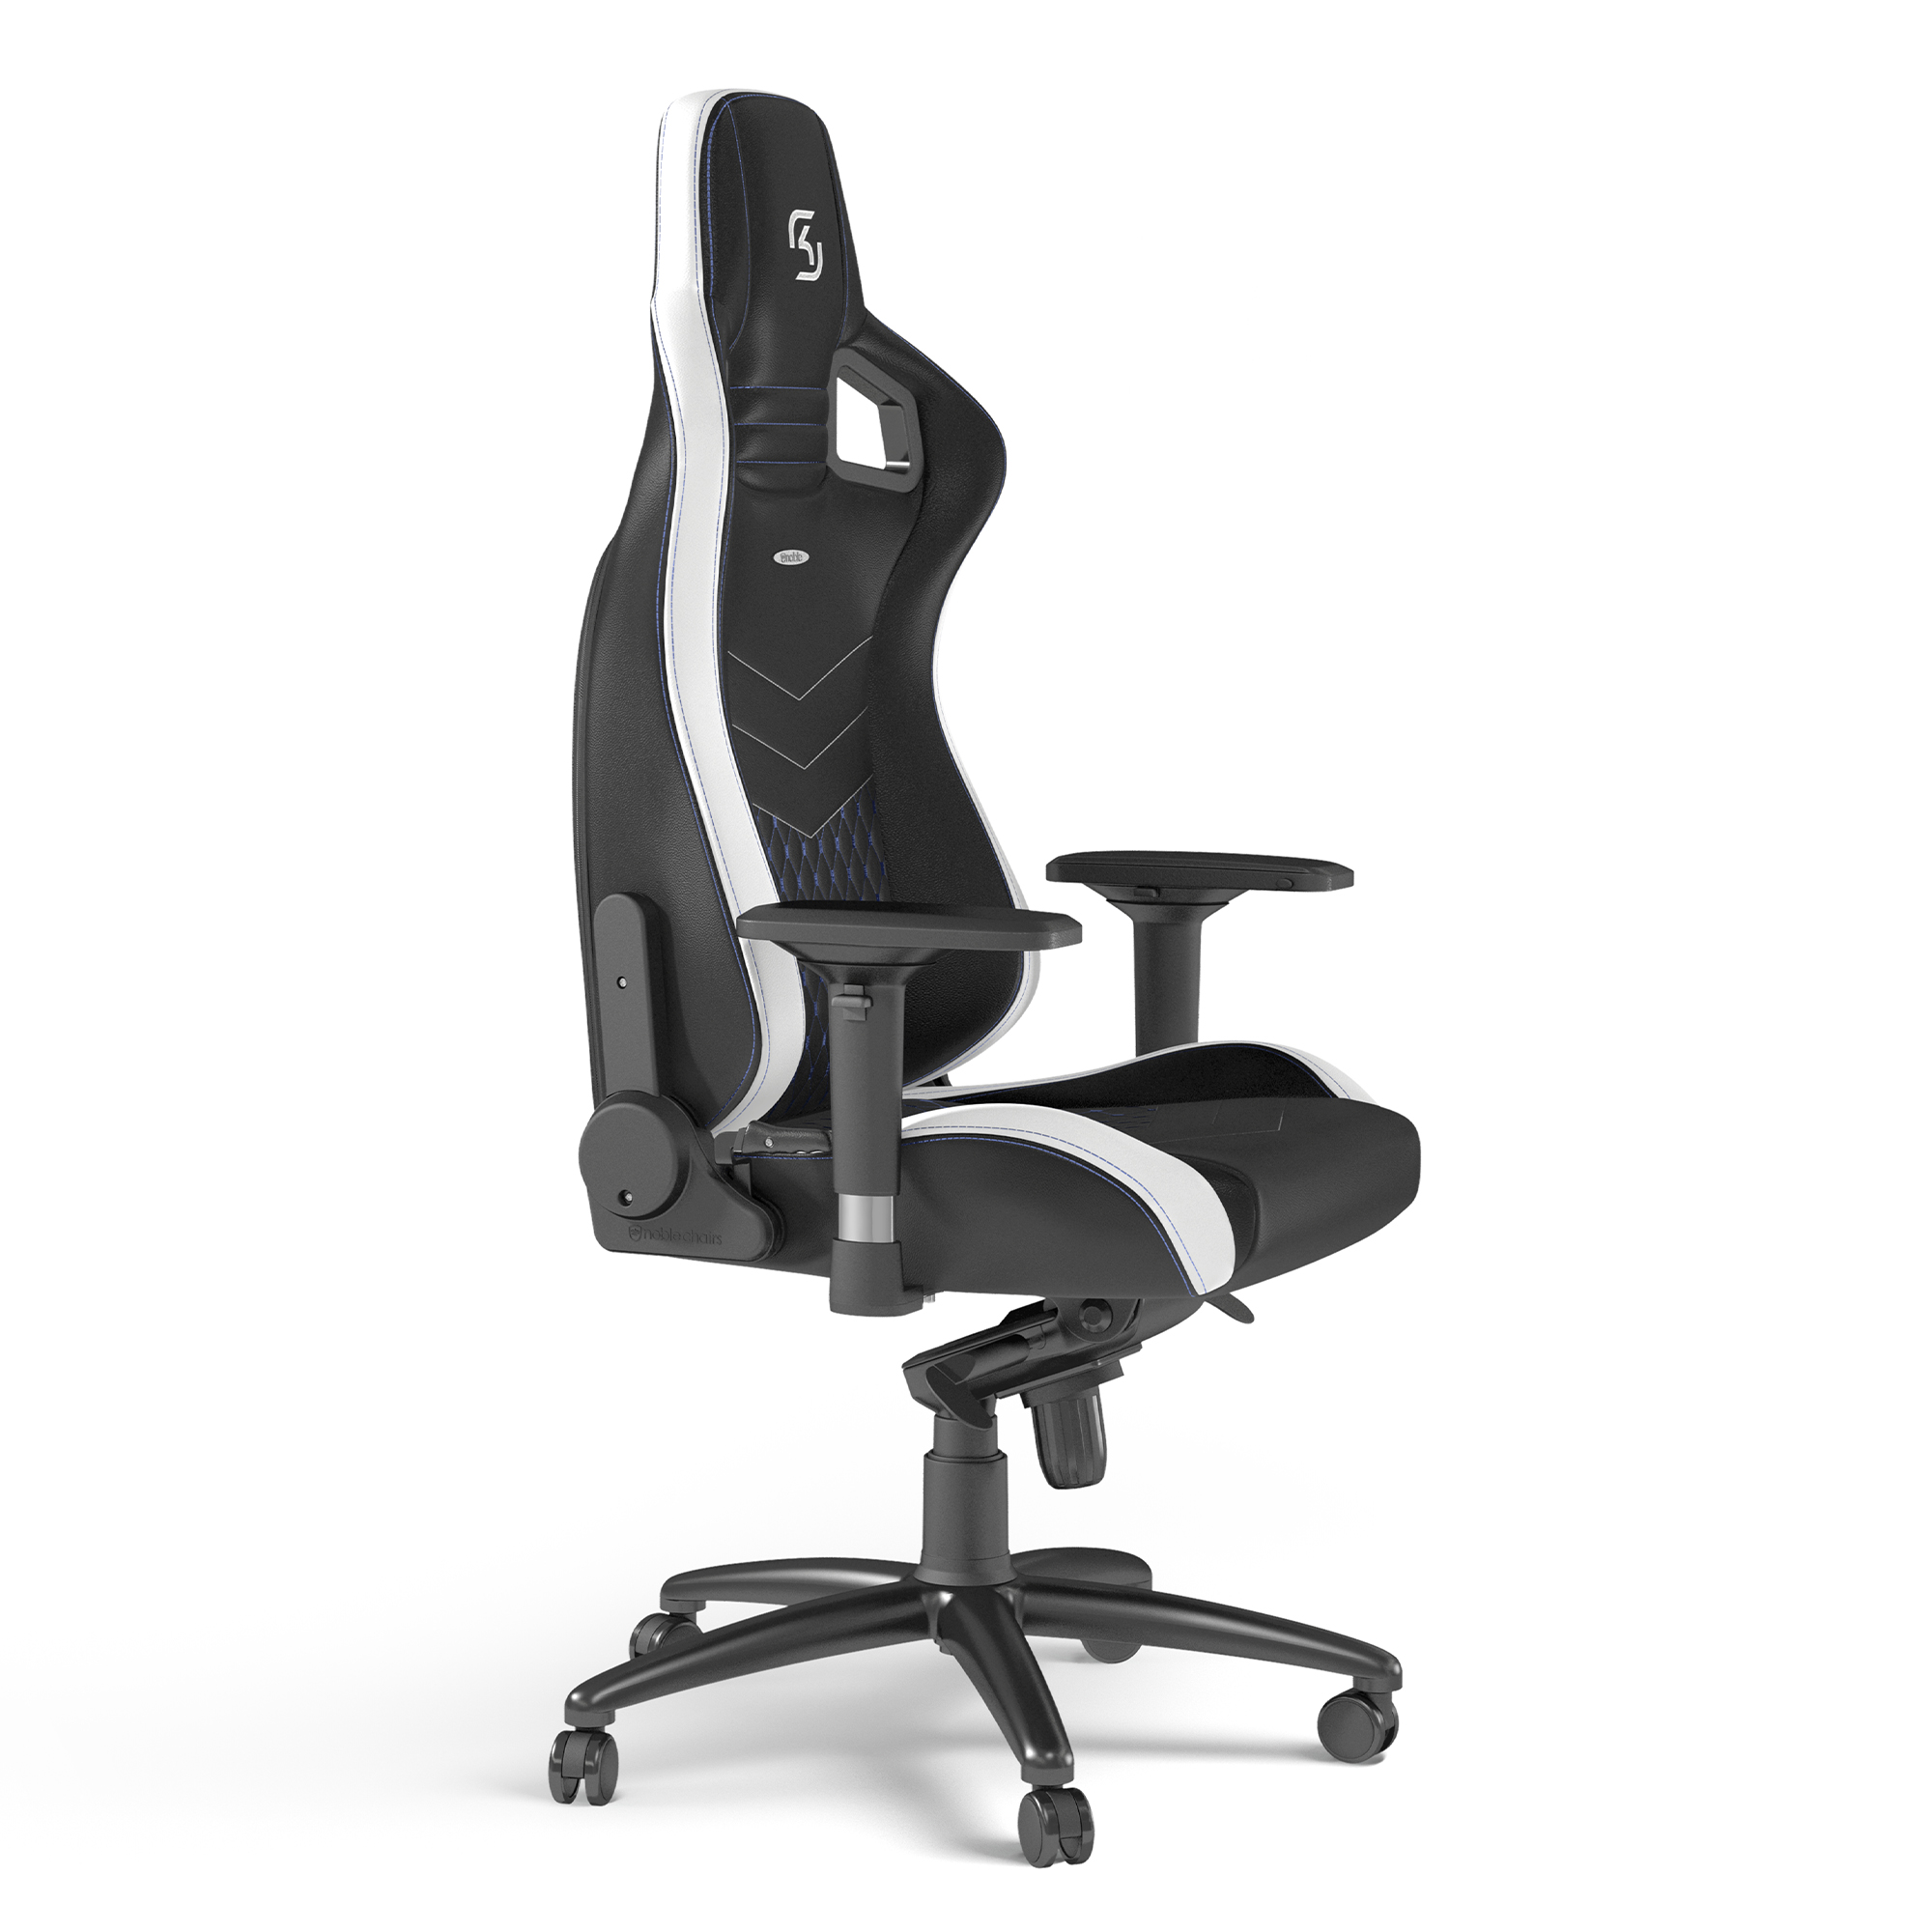 noblechairs - noblechairs EPIC Gaming Chair - SK Gaming Edition